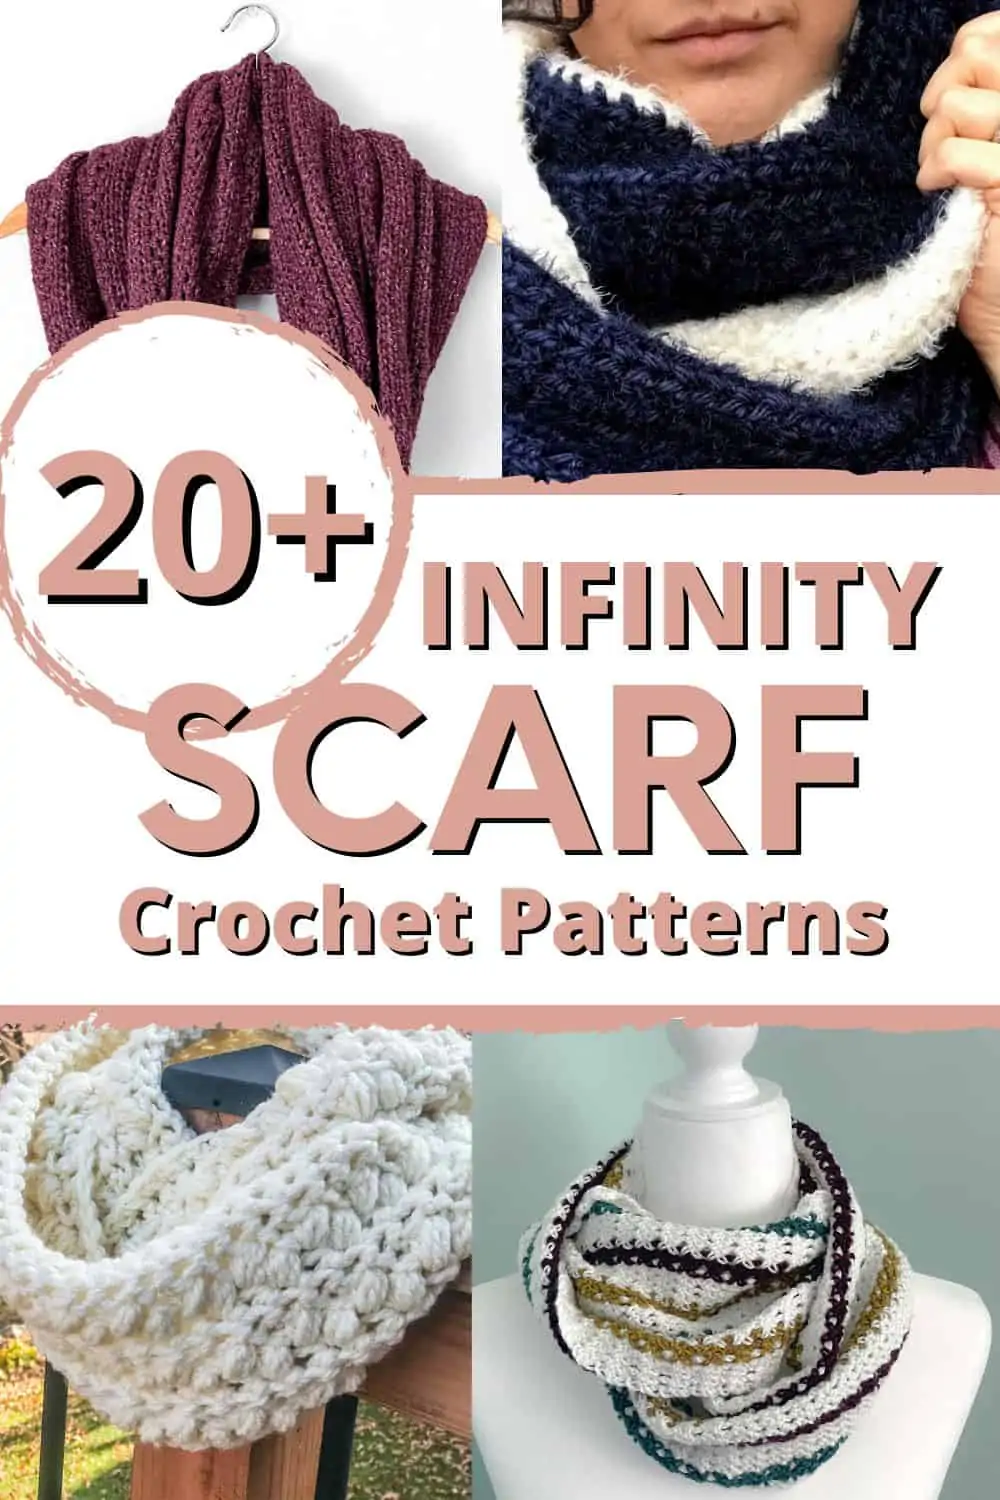 graphic reading "20+ infinity scarf crochet patterns" with collage of crochet infinity scarves